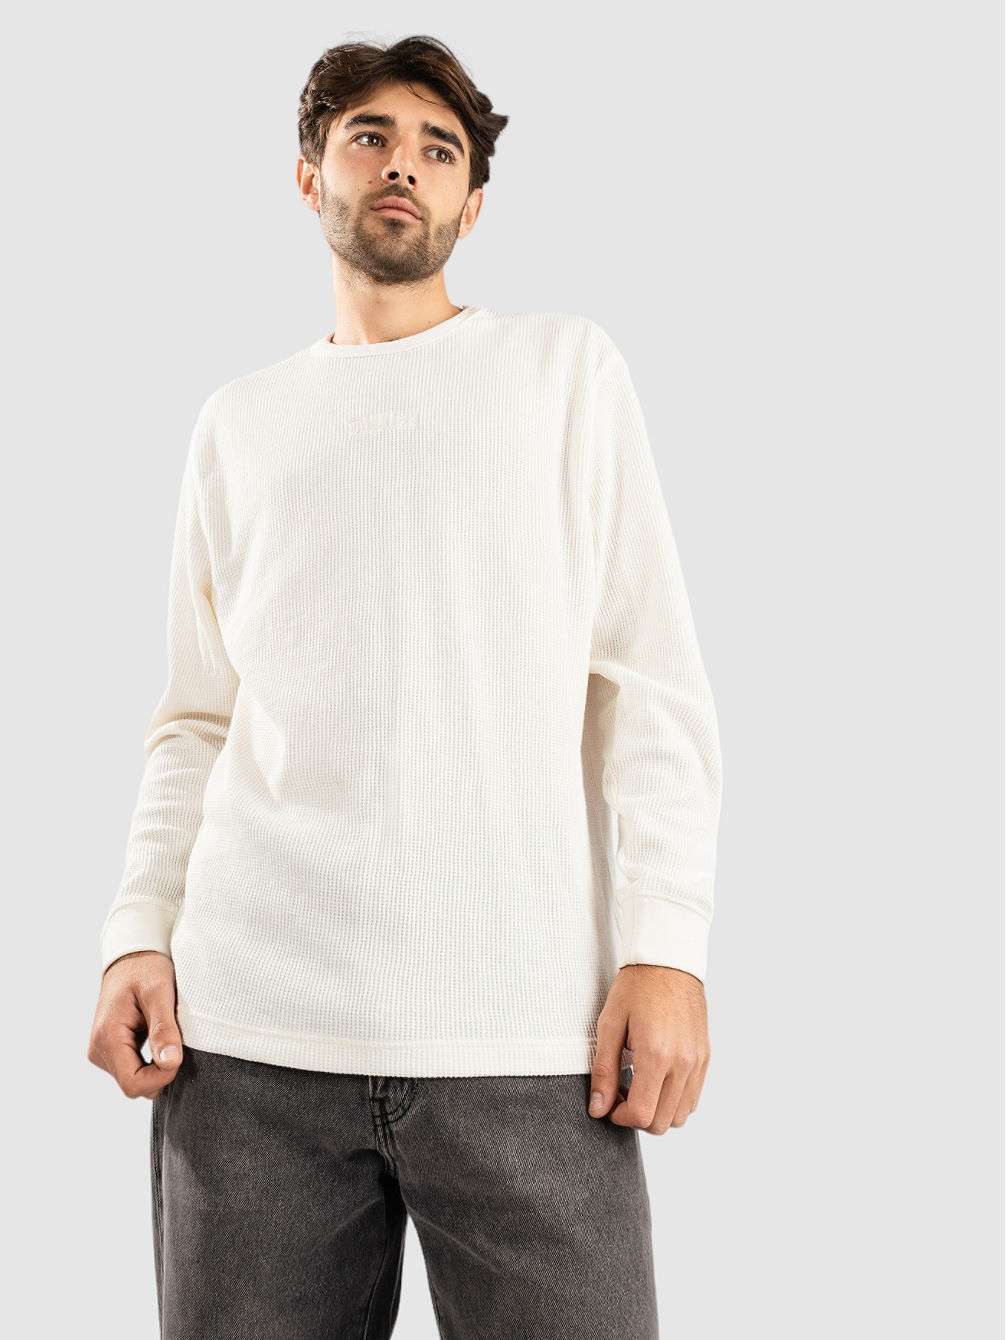 Tom Knox Thermal Embroidery Long Sleeve T-Sh